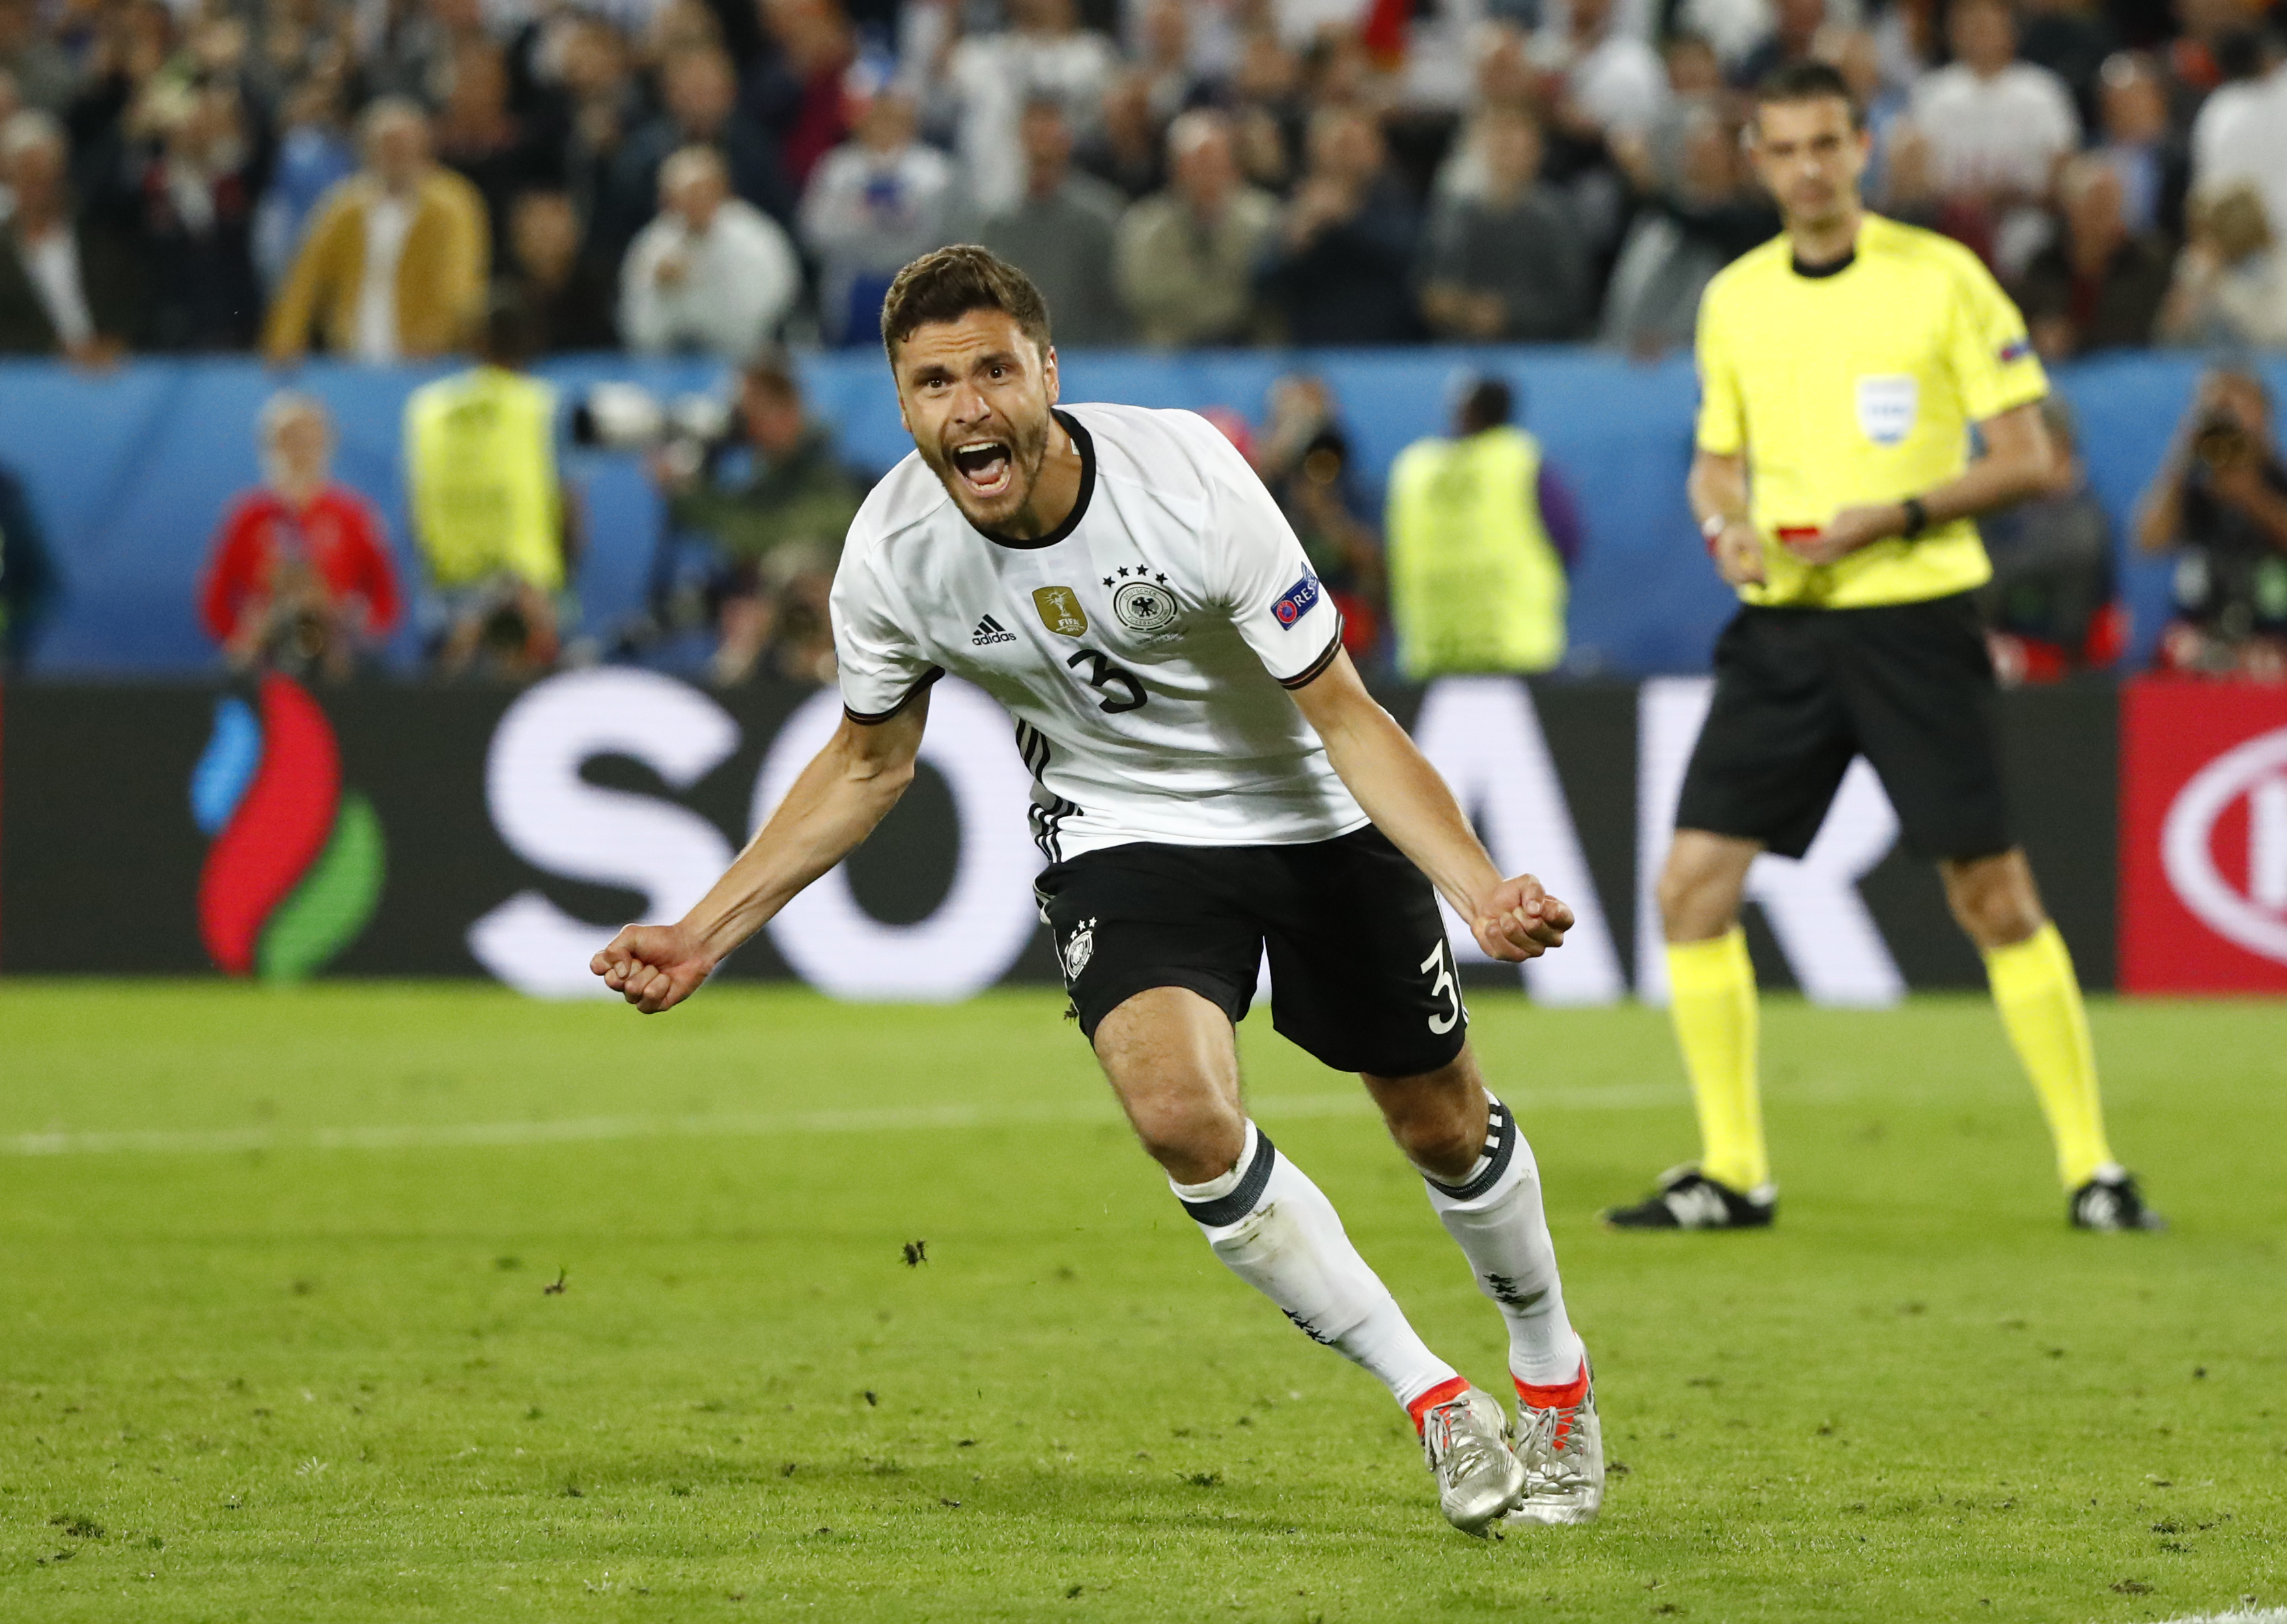 Euro 2016: Germany beat Italy in shootout to reach semis